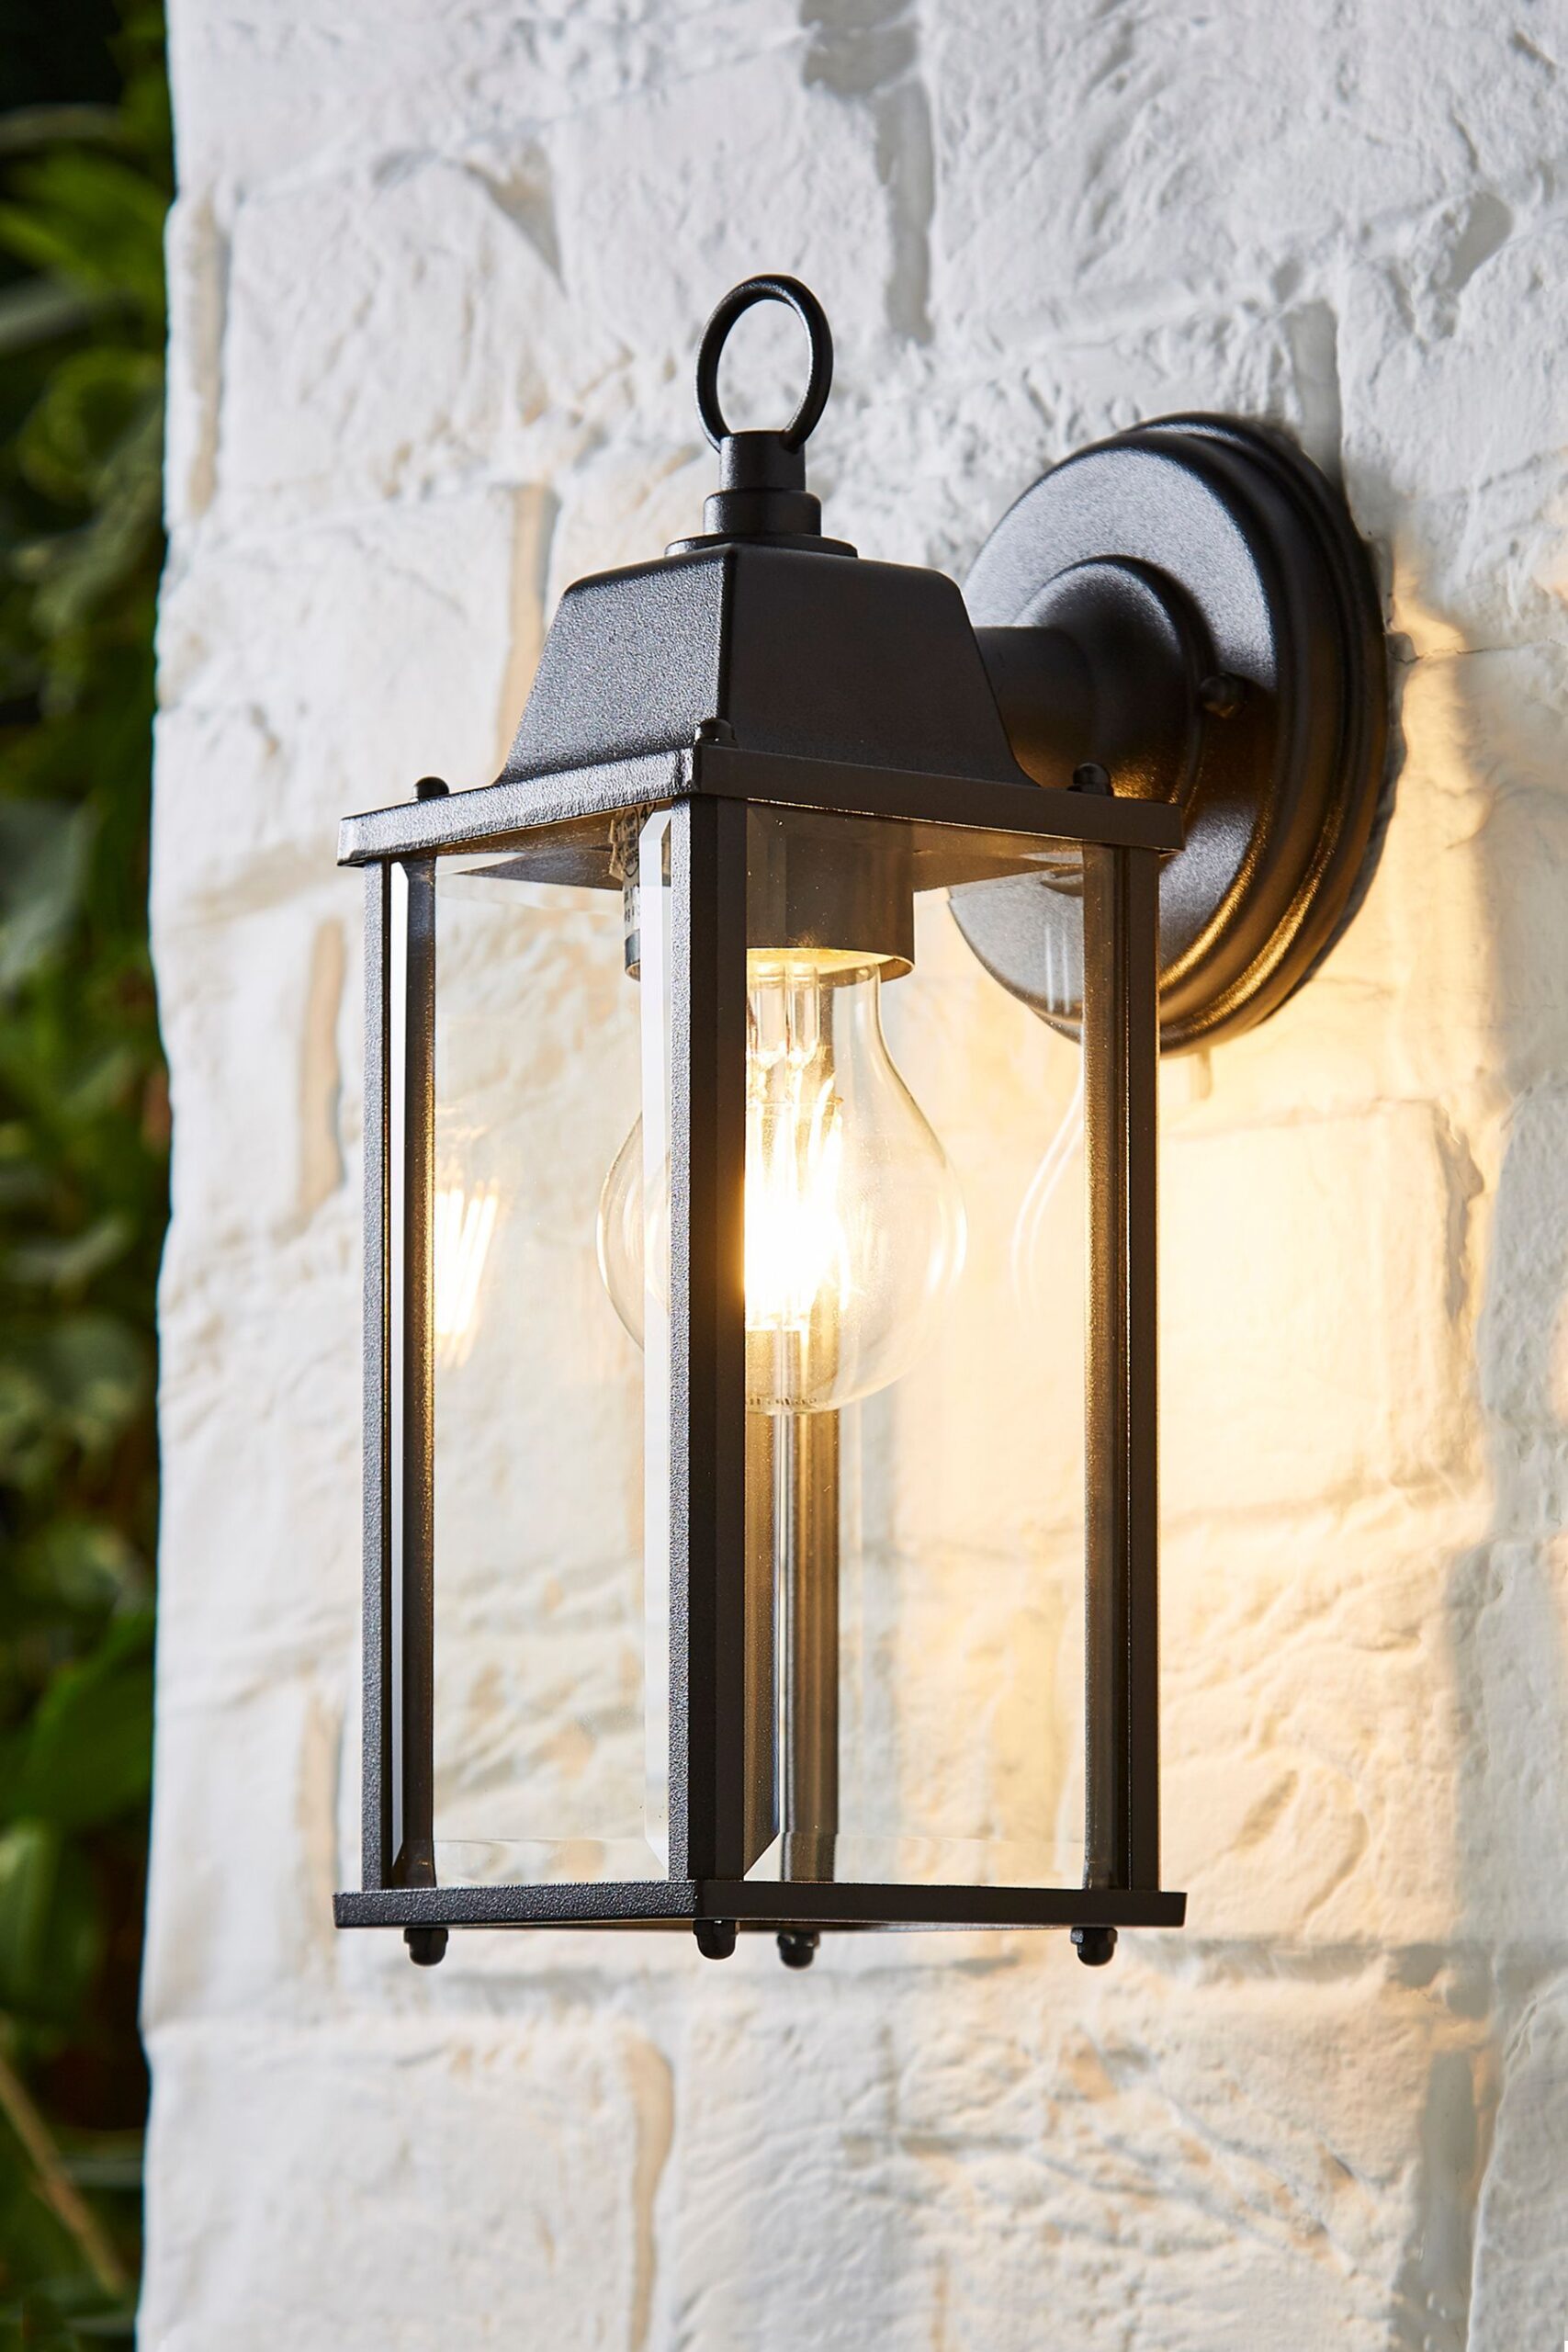 Outdoor Wall Lanterns The Perfect Way to Illuminate Your Outdoor Space